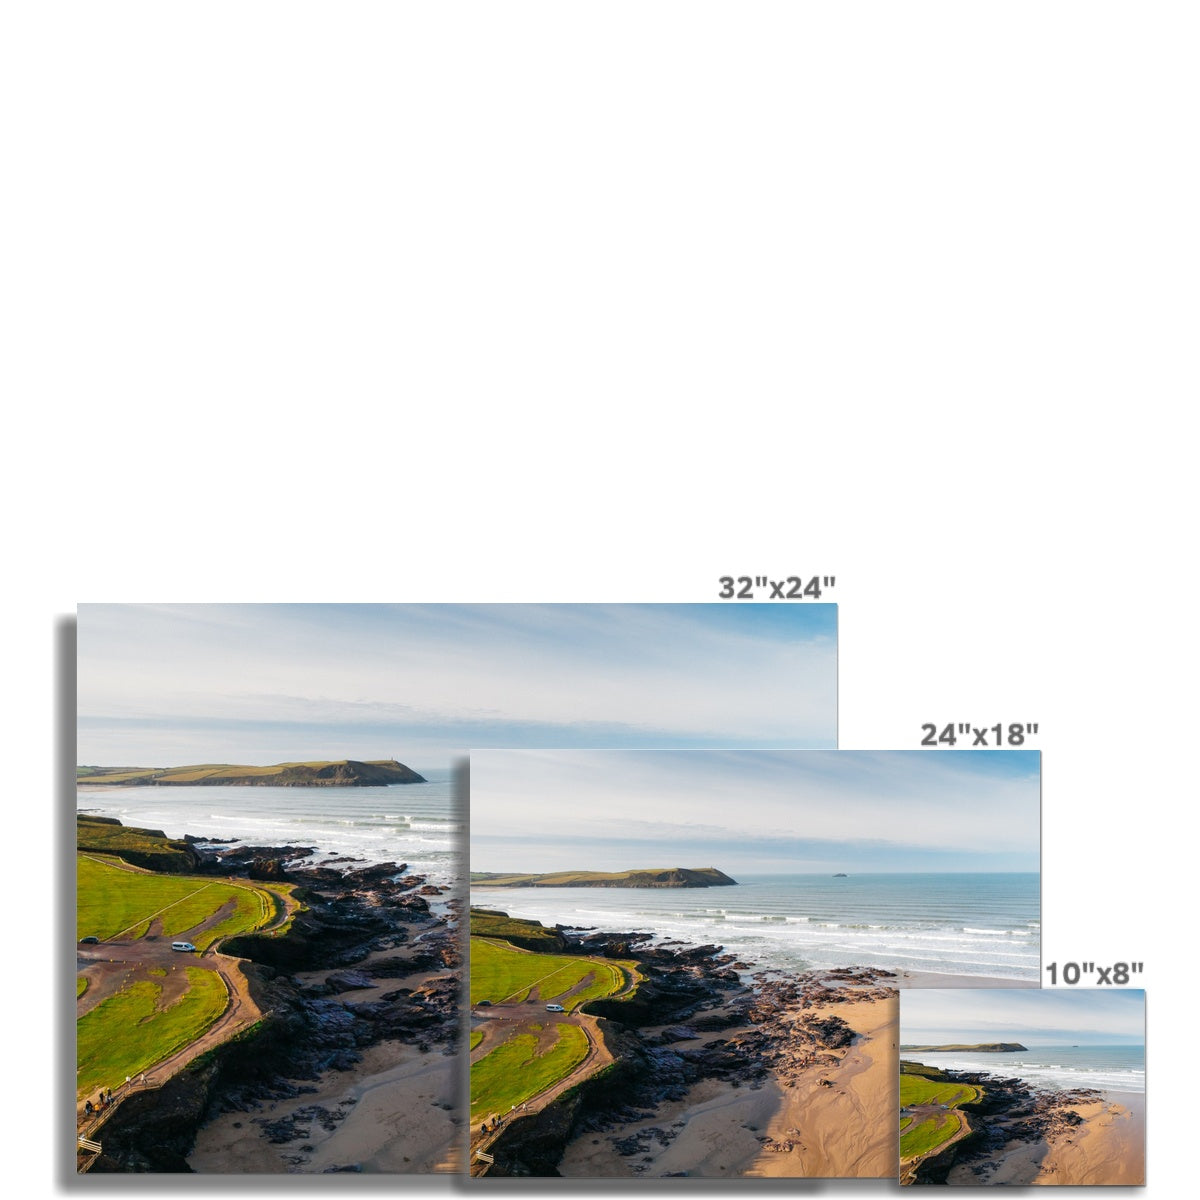 polzeath to stepper point picture sizes